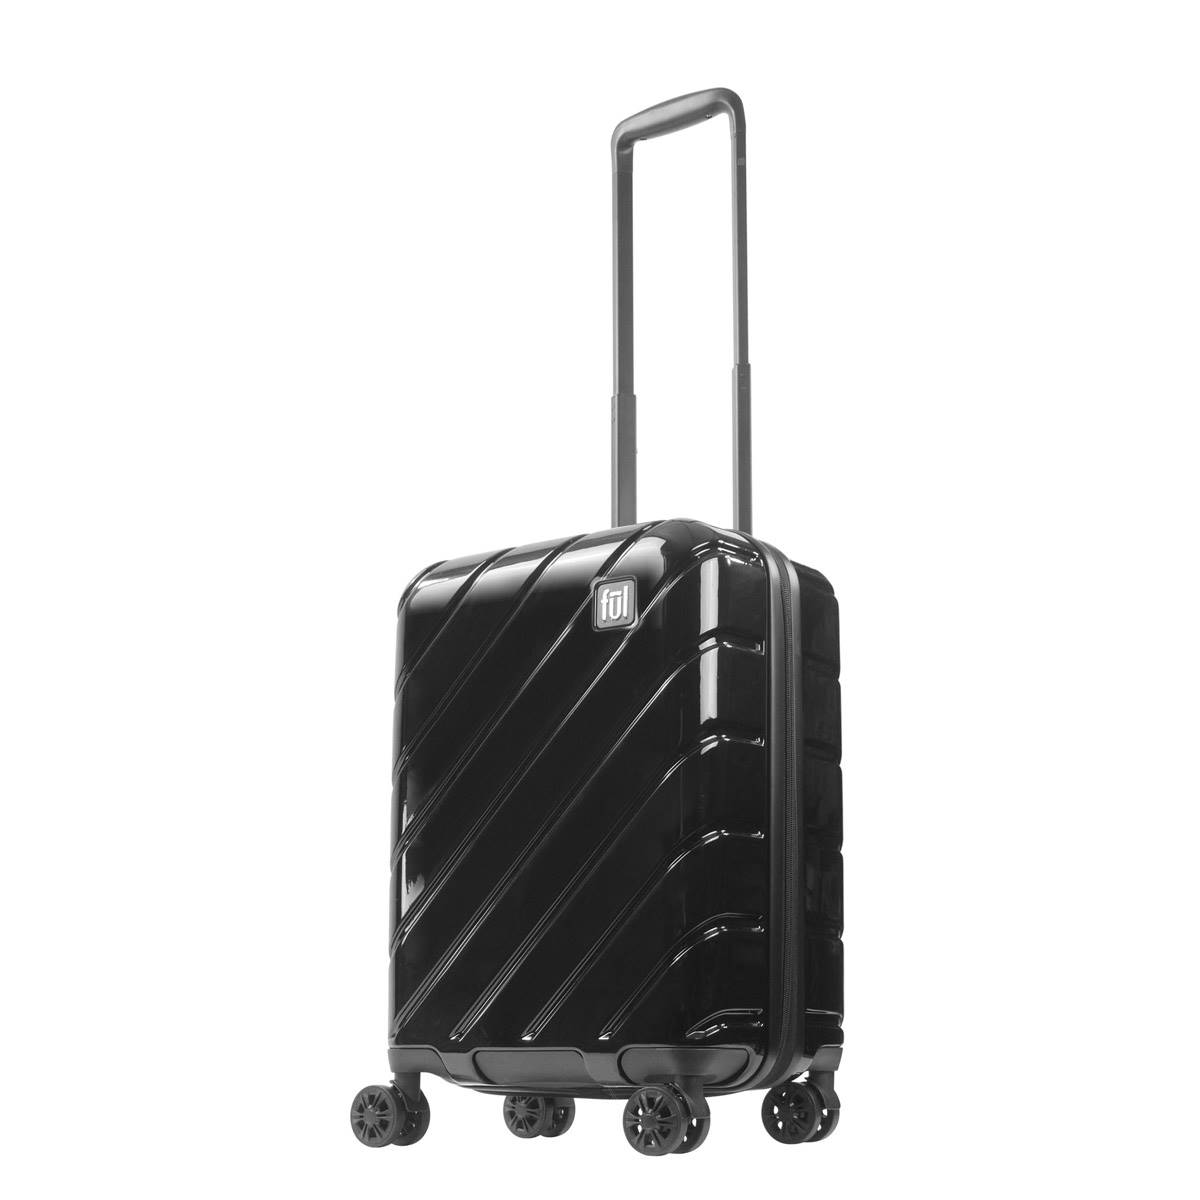 FUL 22in. Velocity Hardside Carry-On Spinner Luggage